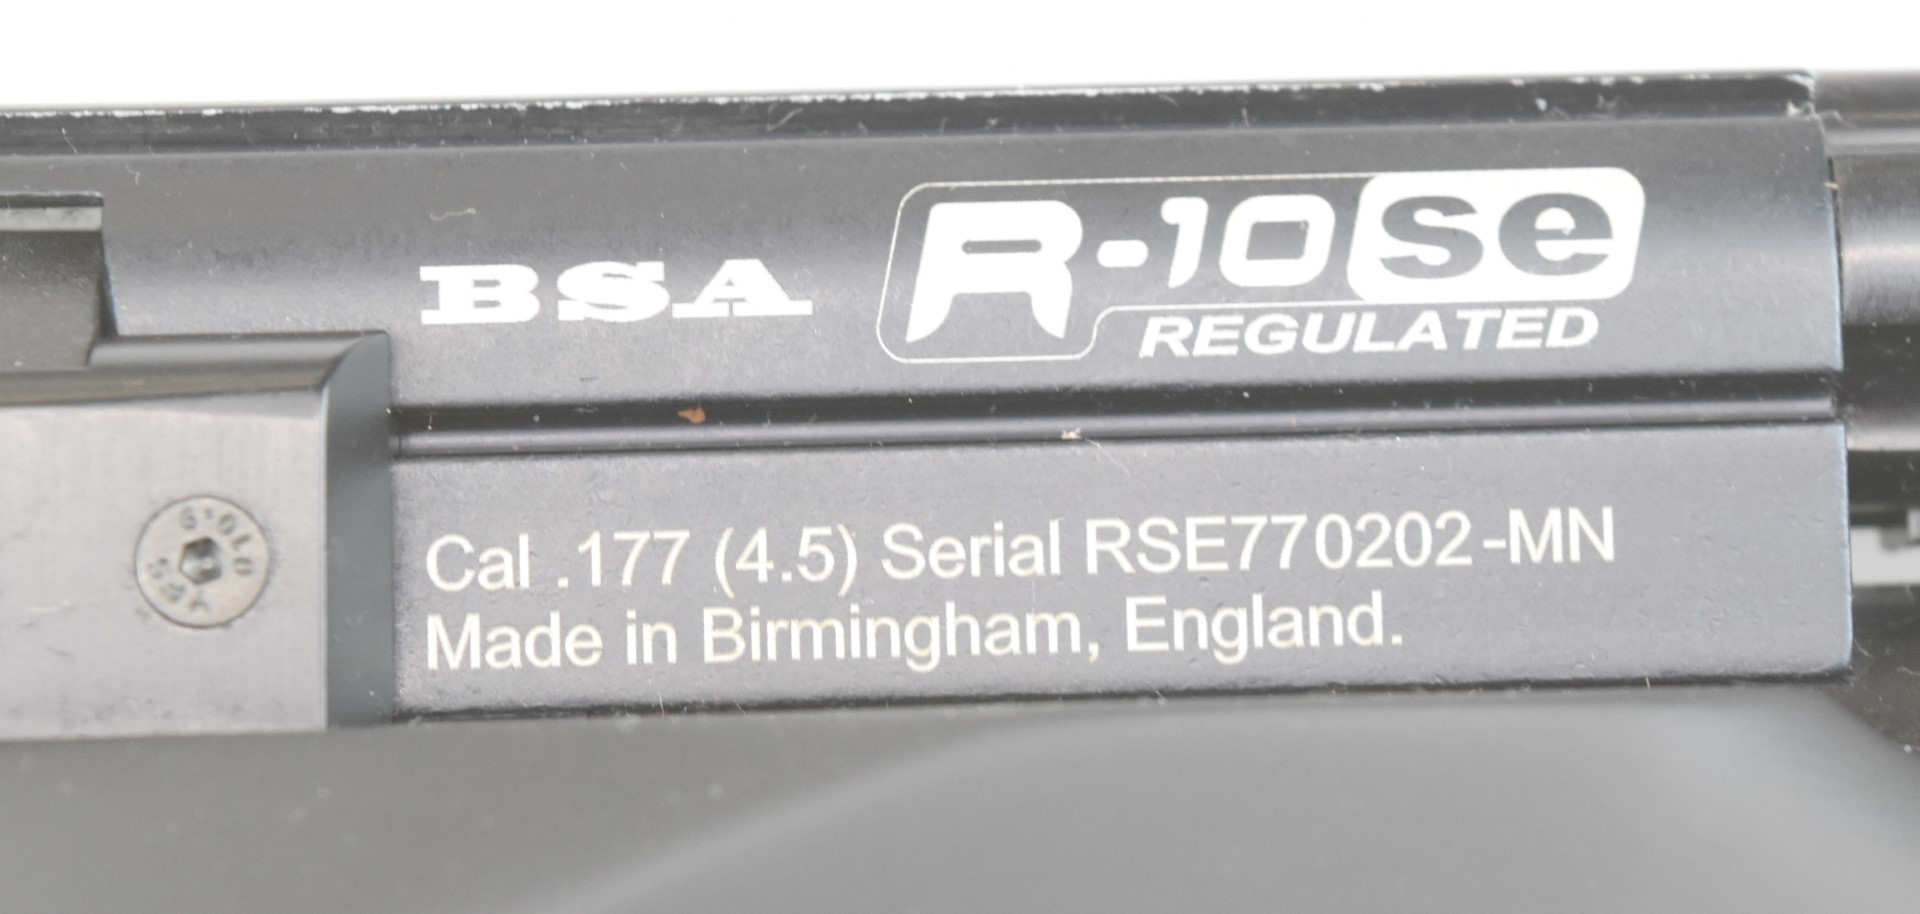 BSA R-10 SE Regulated .177 PCP air rifle with textured semi-pistol grip and forend, raised cheek - Image 10 of 22